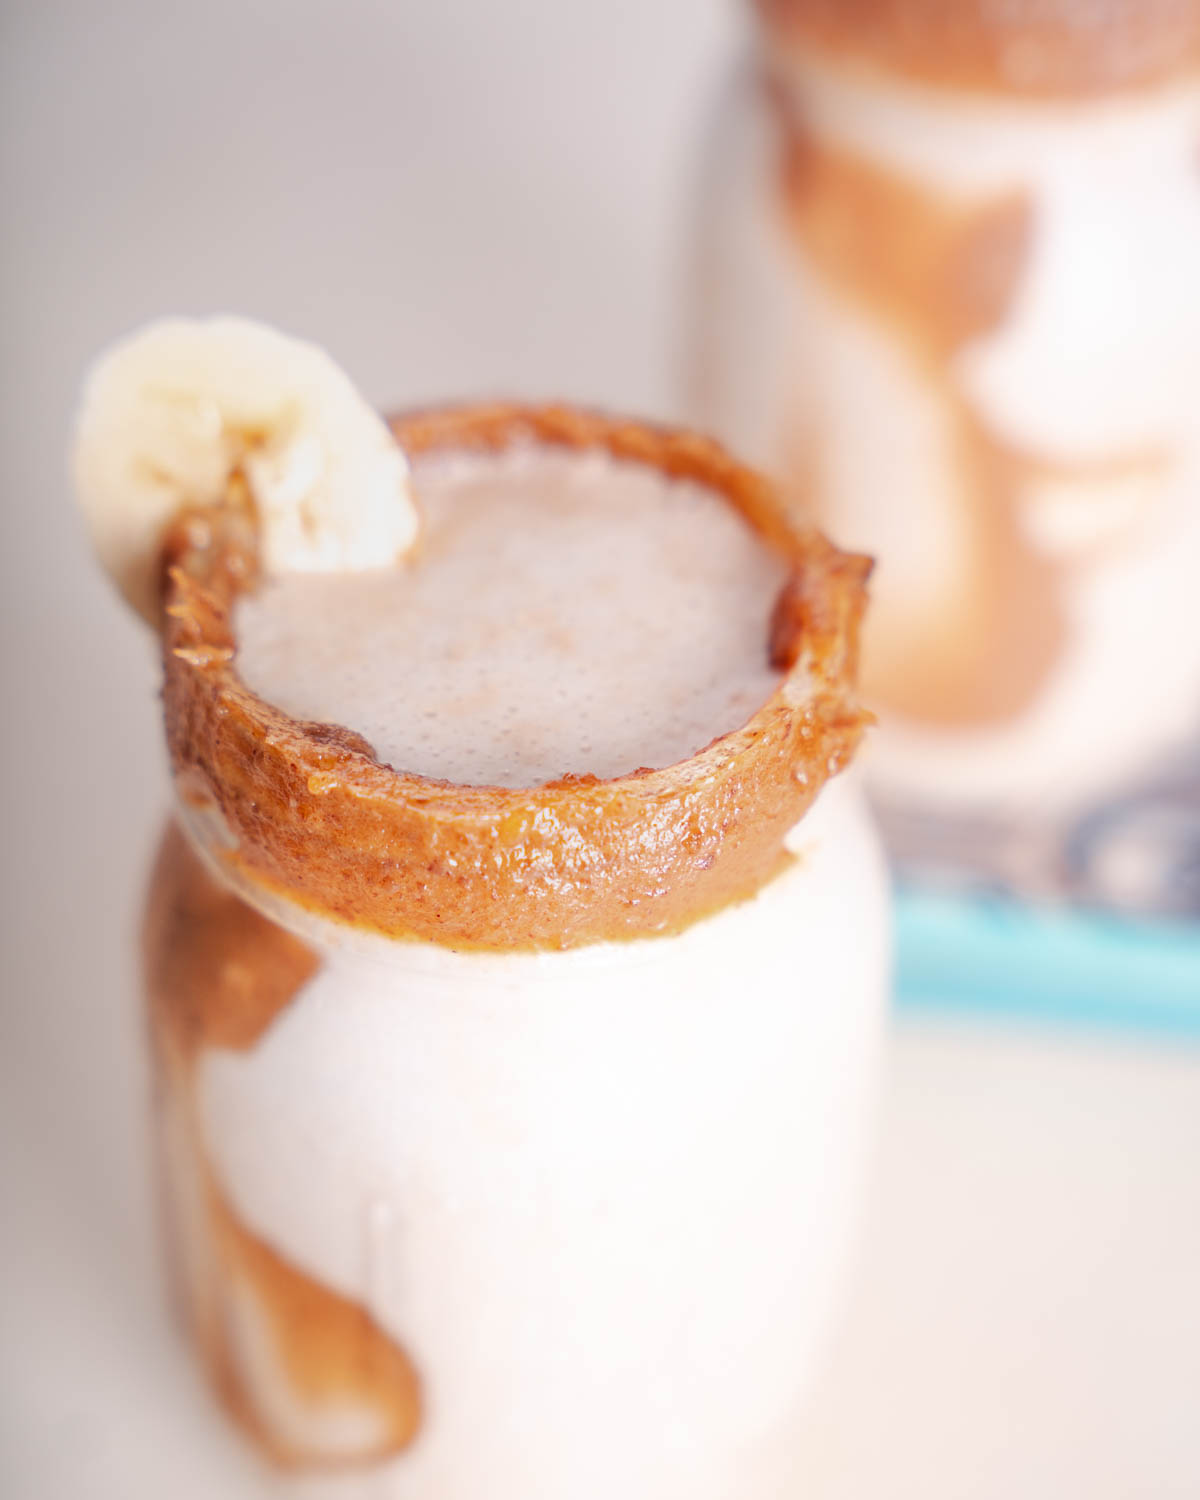 Close up image of the date caramel rim and sliced banana garnish on the peanut paradise tropical smoothie cafe copy cat smoothie